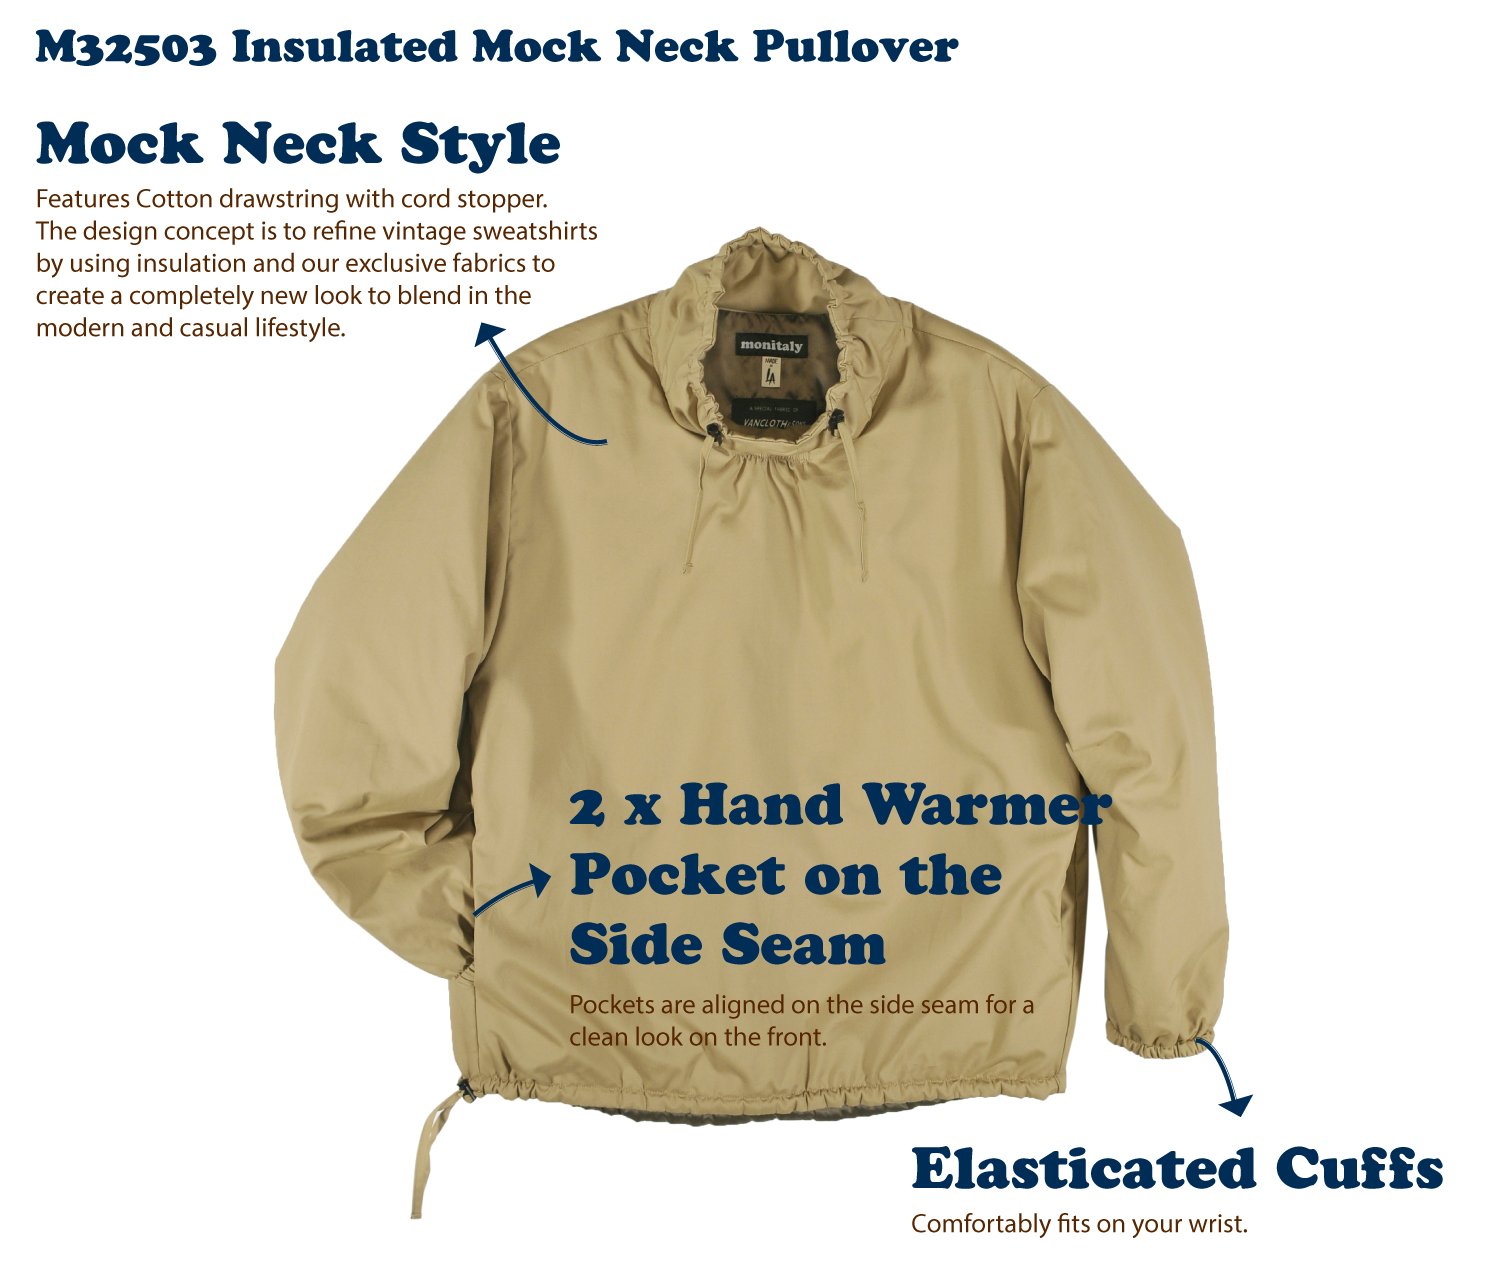 M32503-Insulated-Mock-Neck-Pullover.jpg